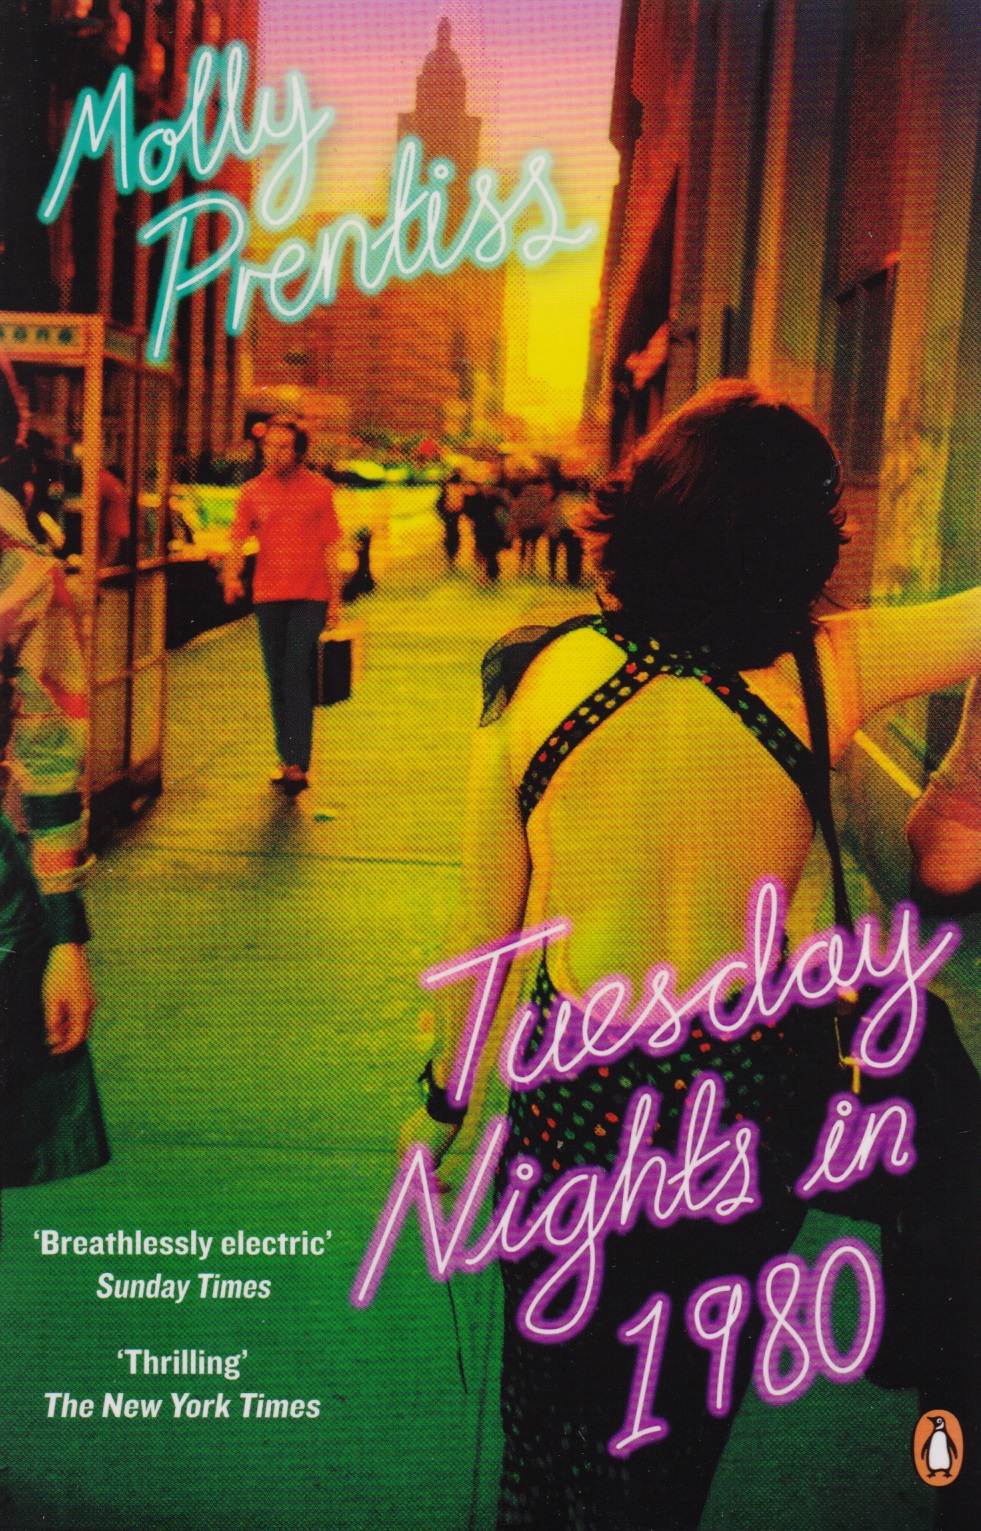 None Tuesday Nights in 1980